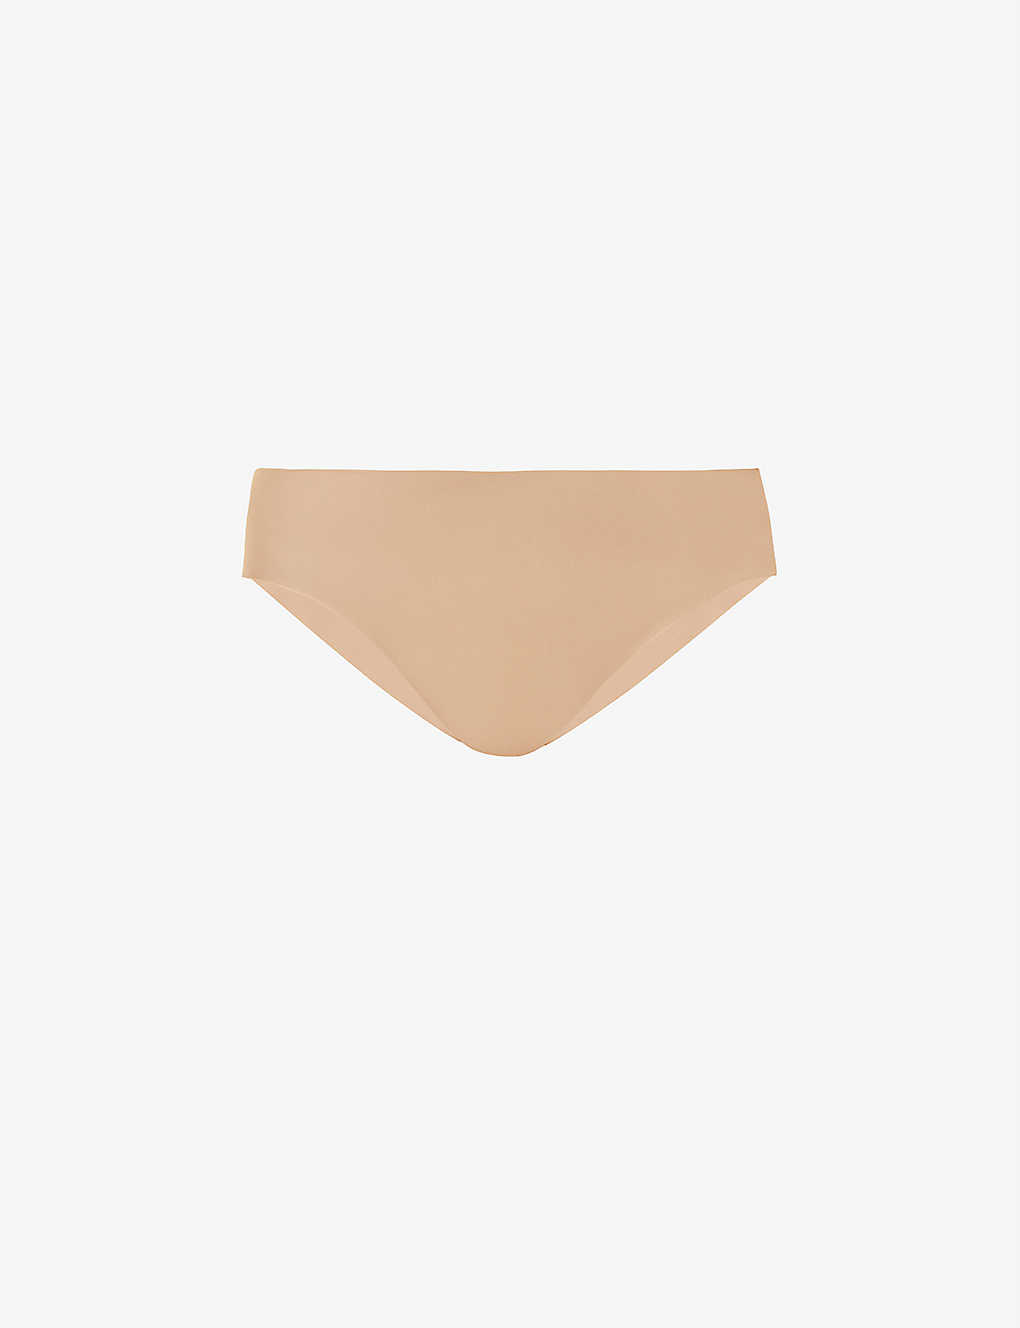 Intuition seamless jersey briefs - Toasted beige